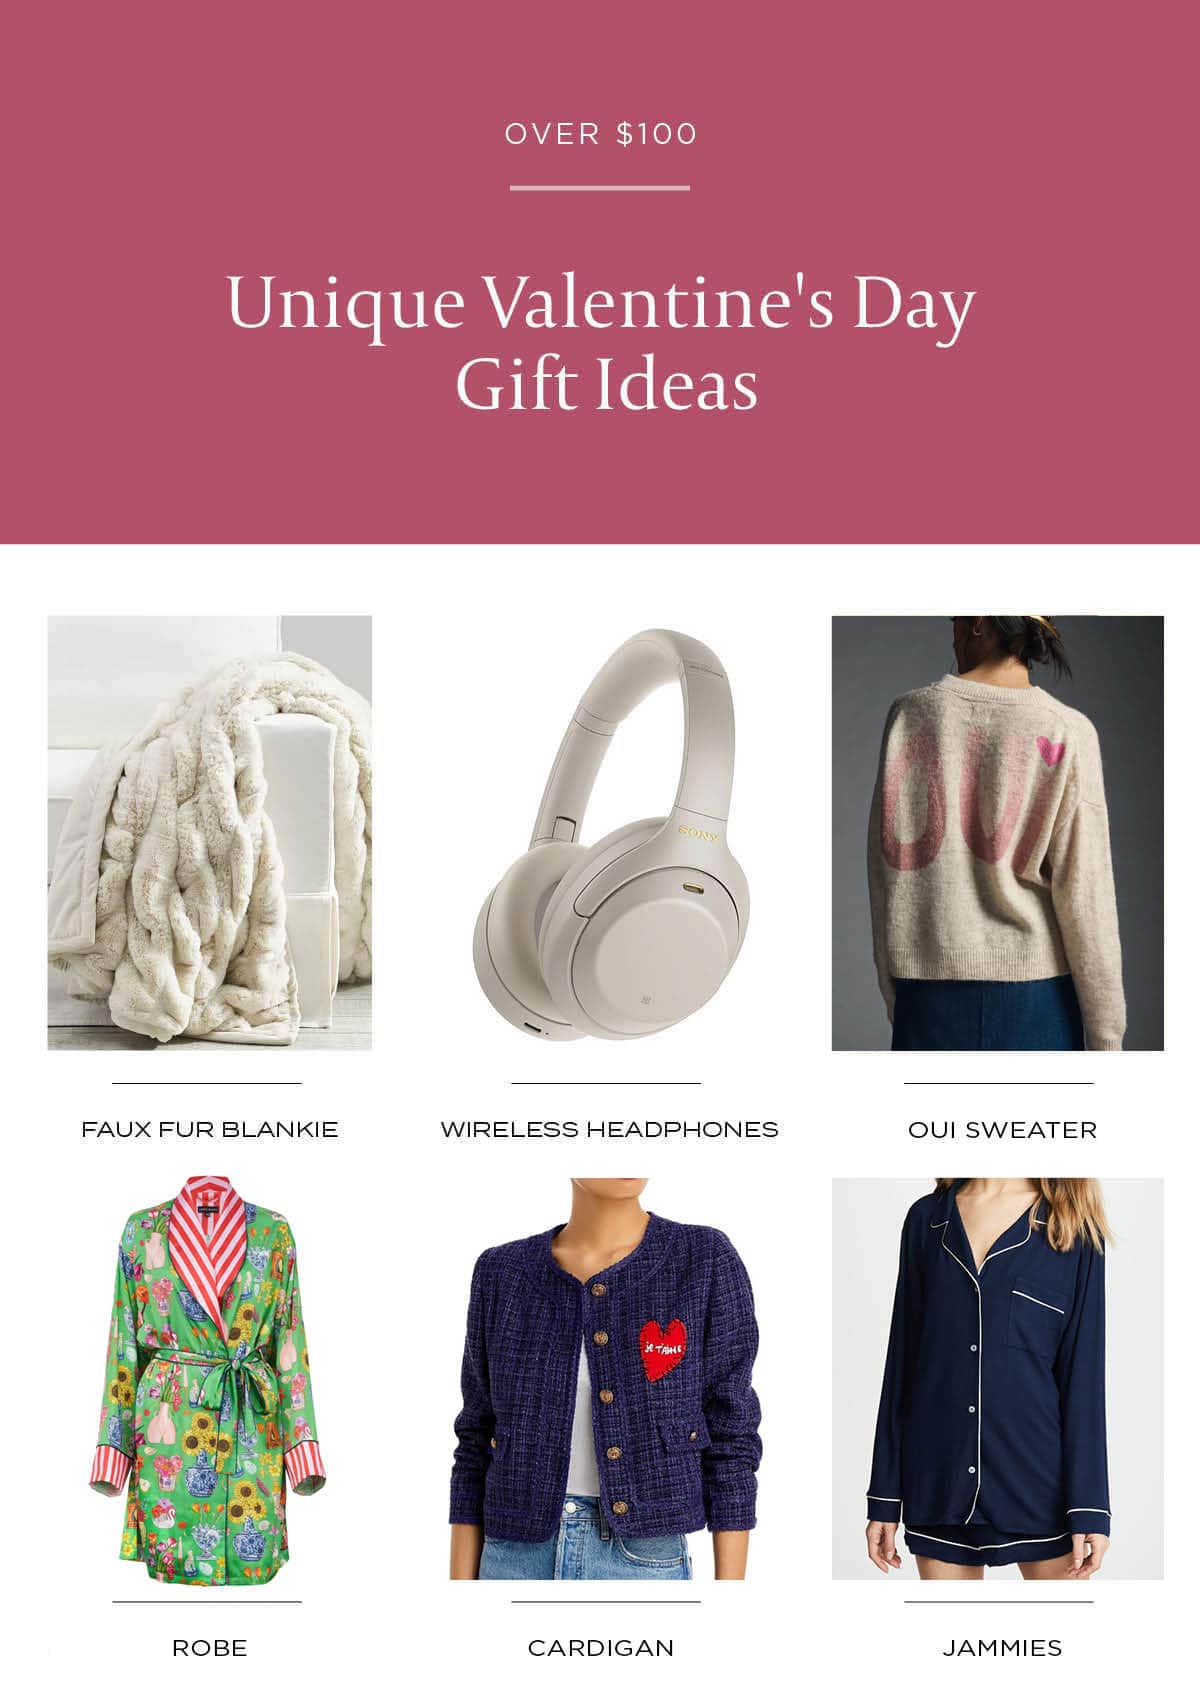 Unique Valentine's Day gift ideas for her over $100